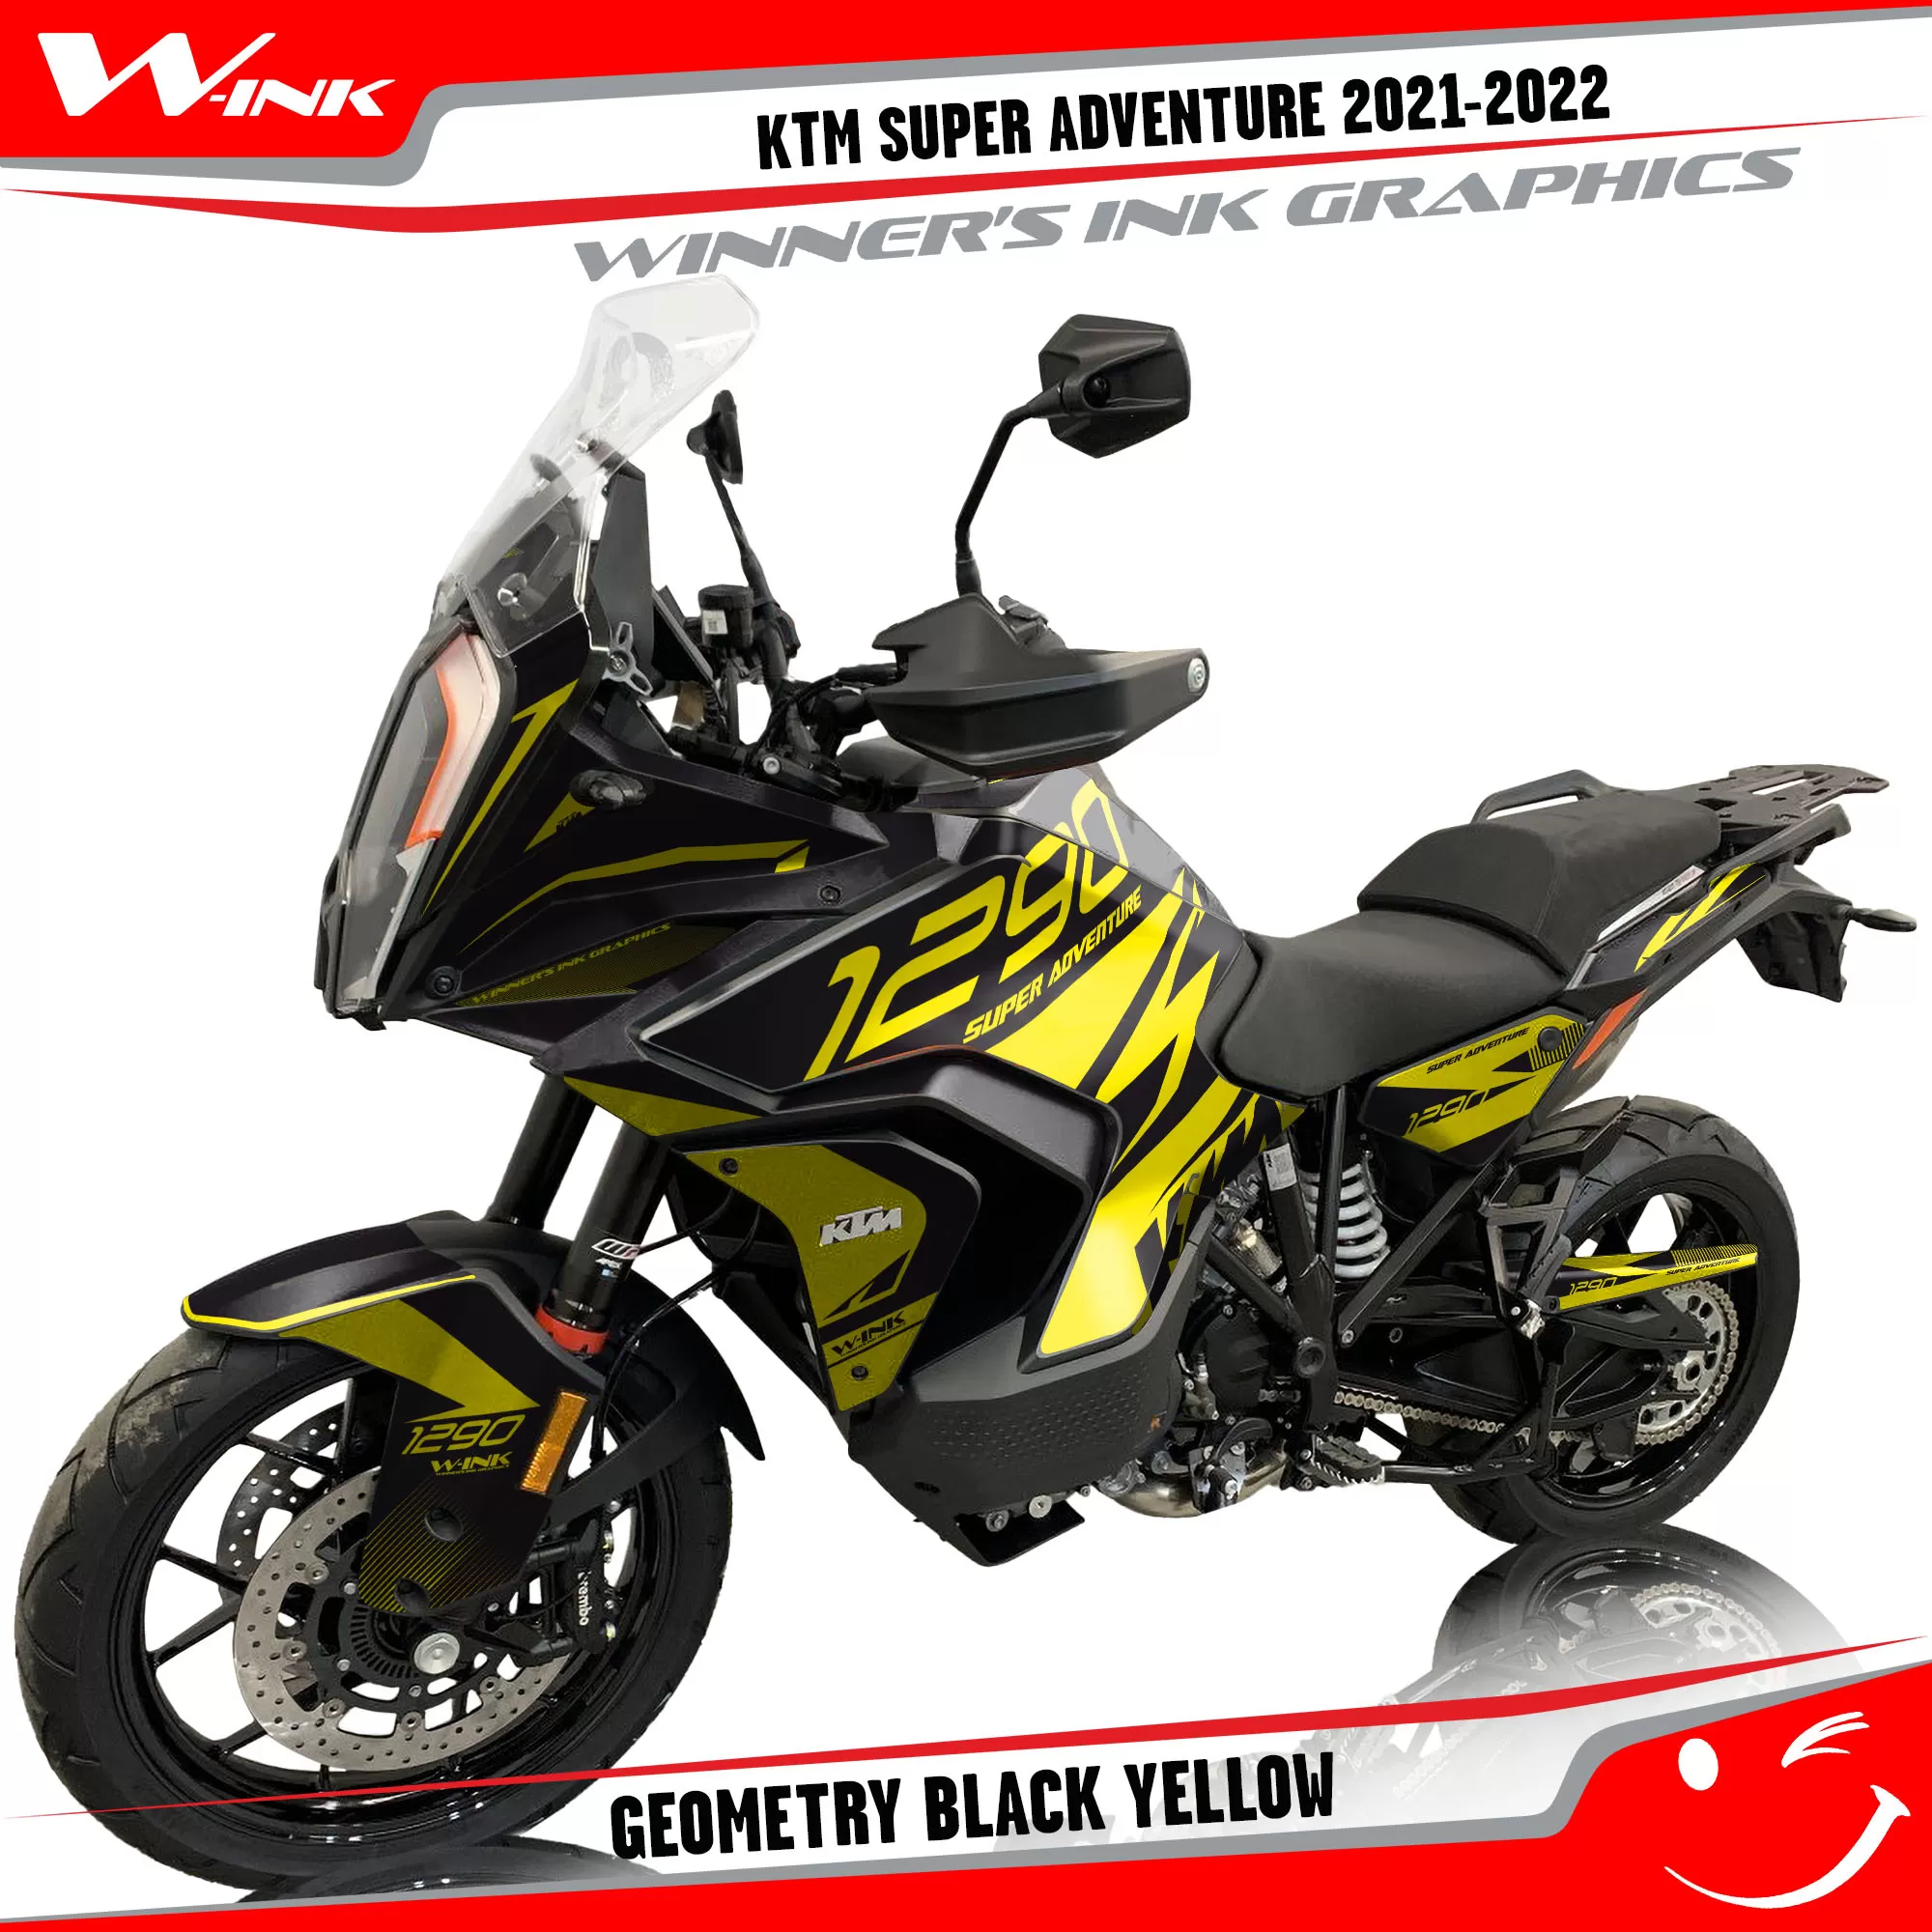 KTM-Super-Adventure-S-2021-2022-graphics-kit-and-decals-with-designs-Geometry-Black-Yellow